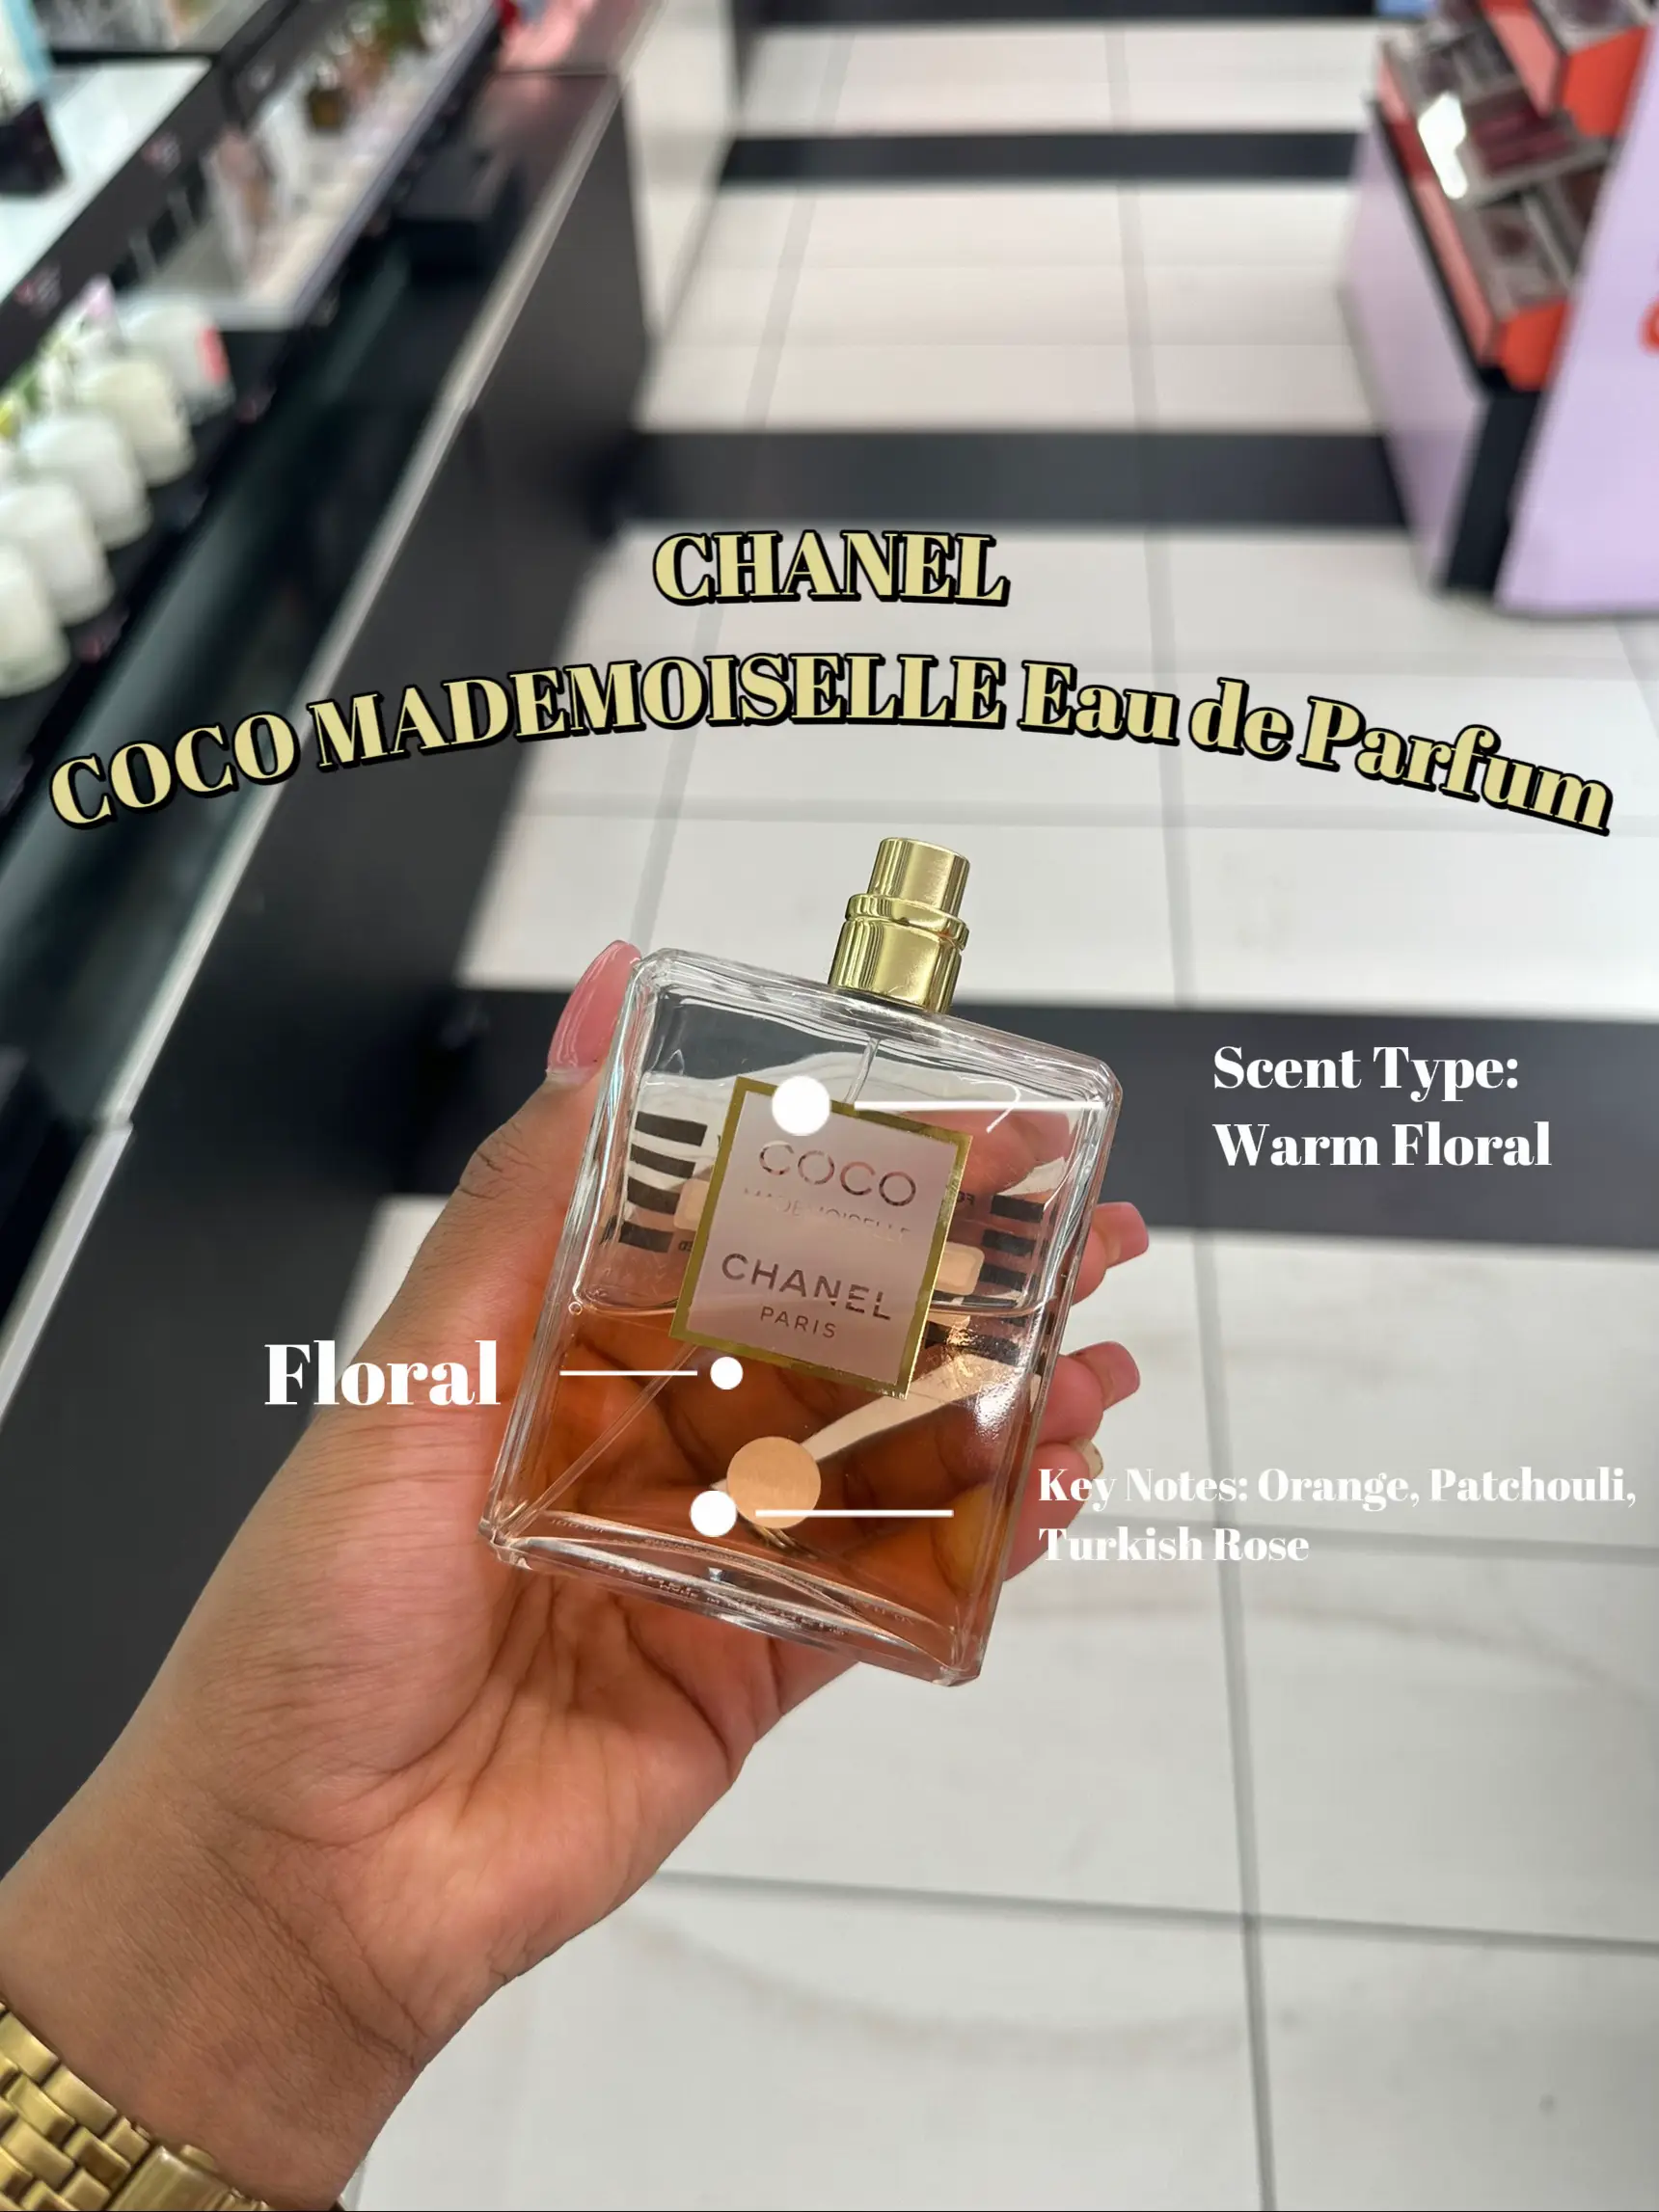 BEST WOMEN PERFUMES FROM SEPHORA 🌸PART 2, Gallery posted by Alejandracsd